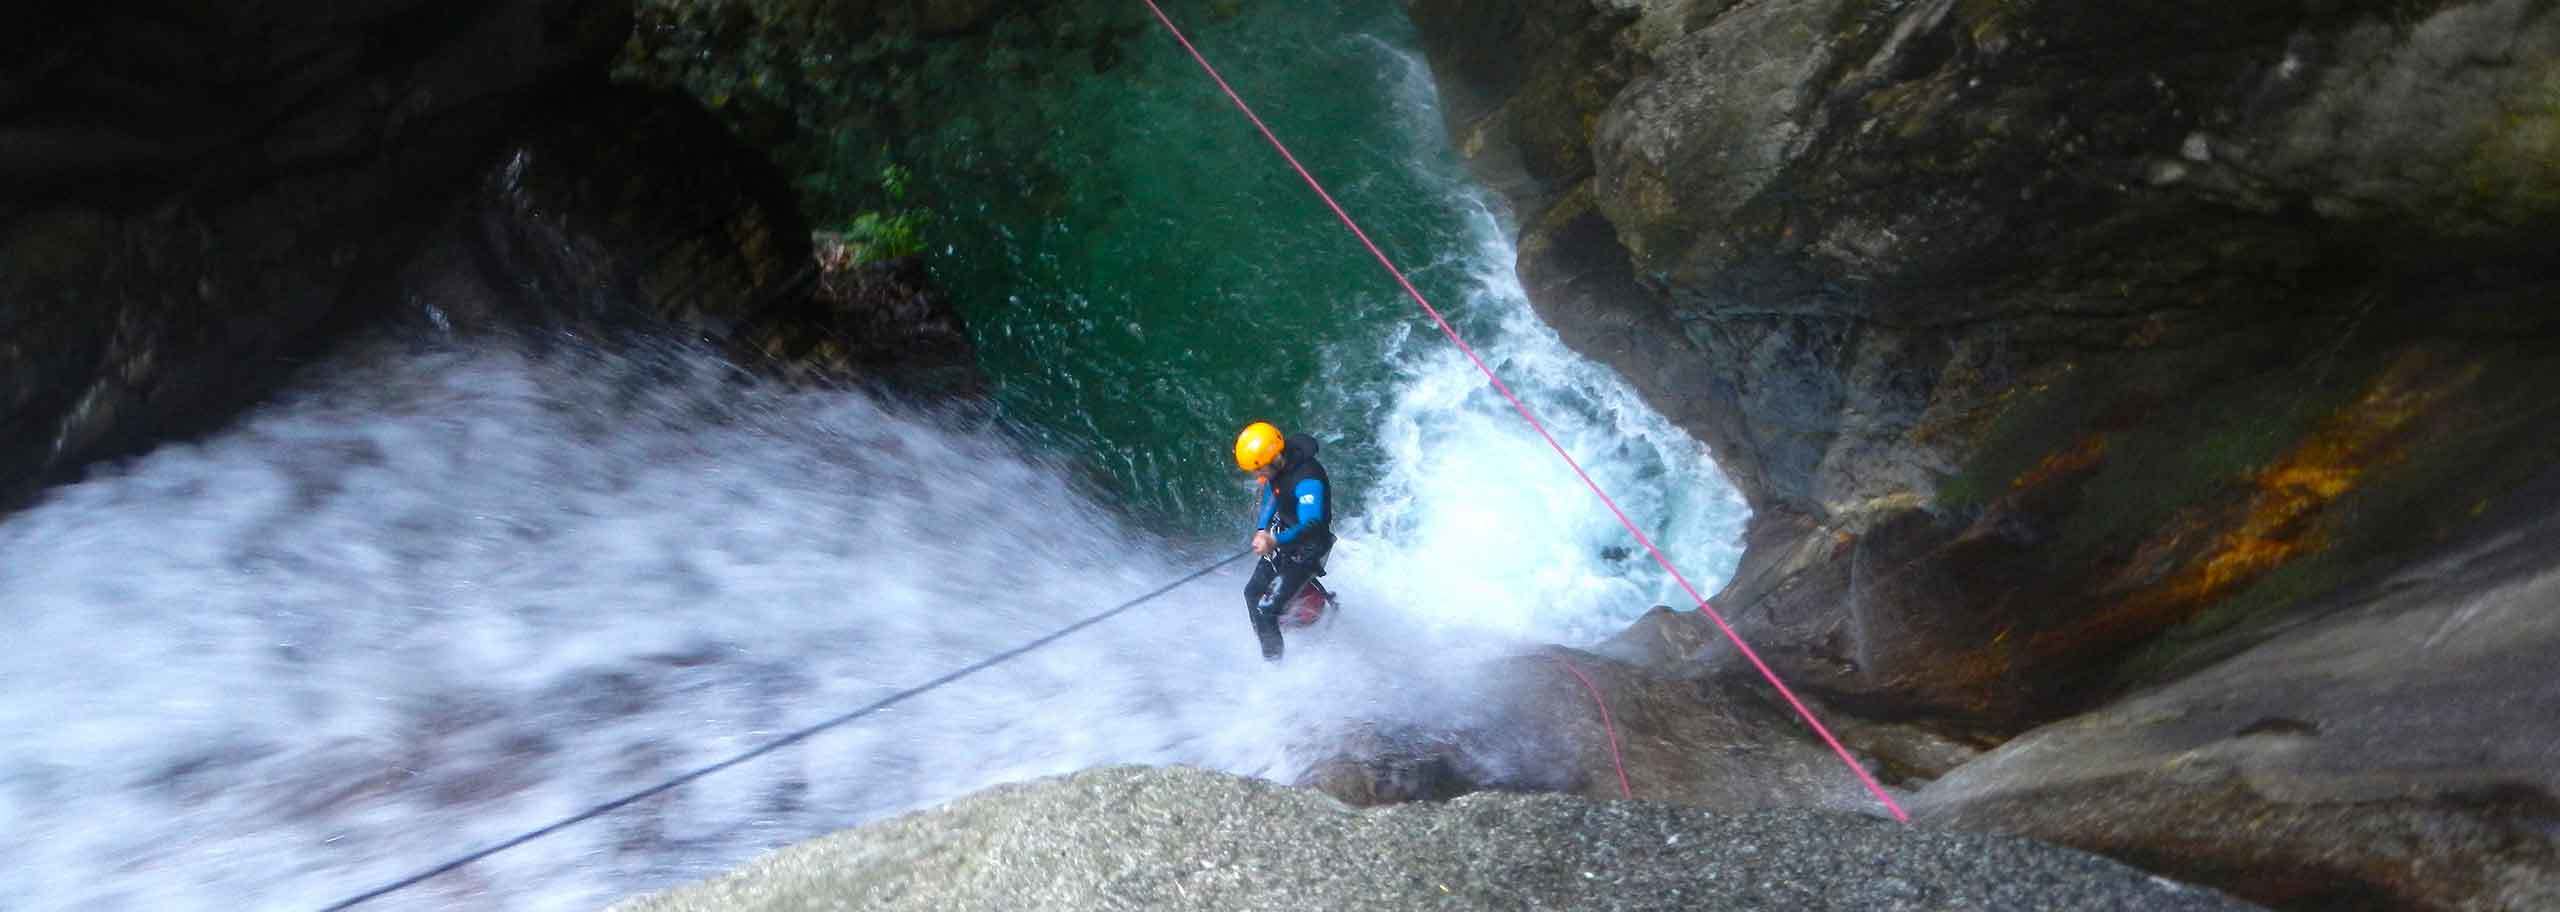 Canyoning in Val Resia, Rio Ronch